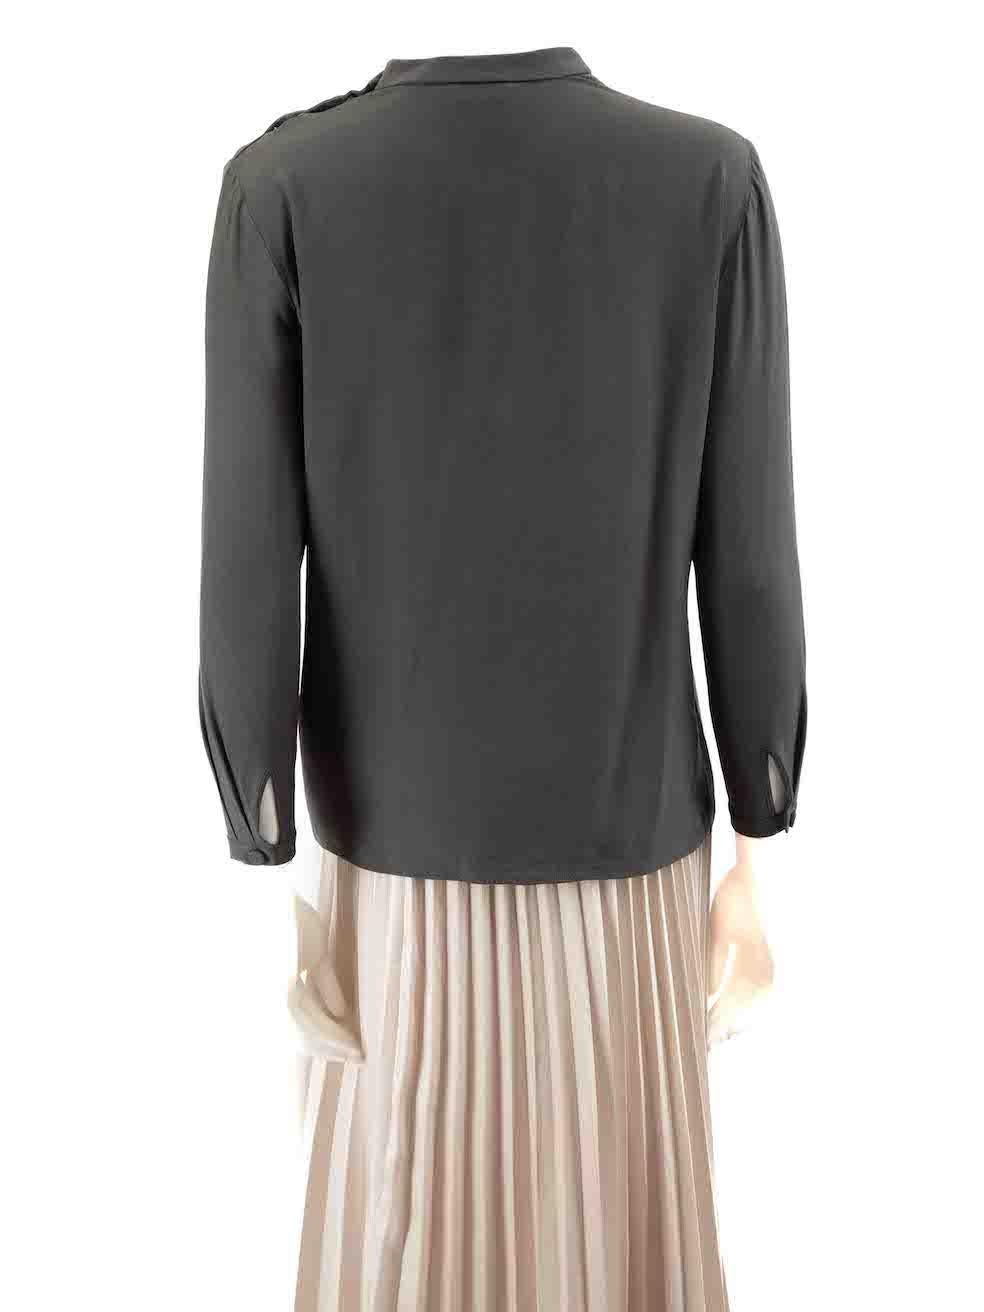 Saint Laurent Grey Silk Pleated Neckline Top Size S In Good Condition For Sale In London, GB